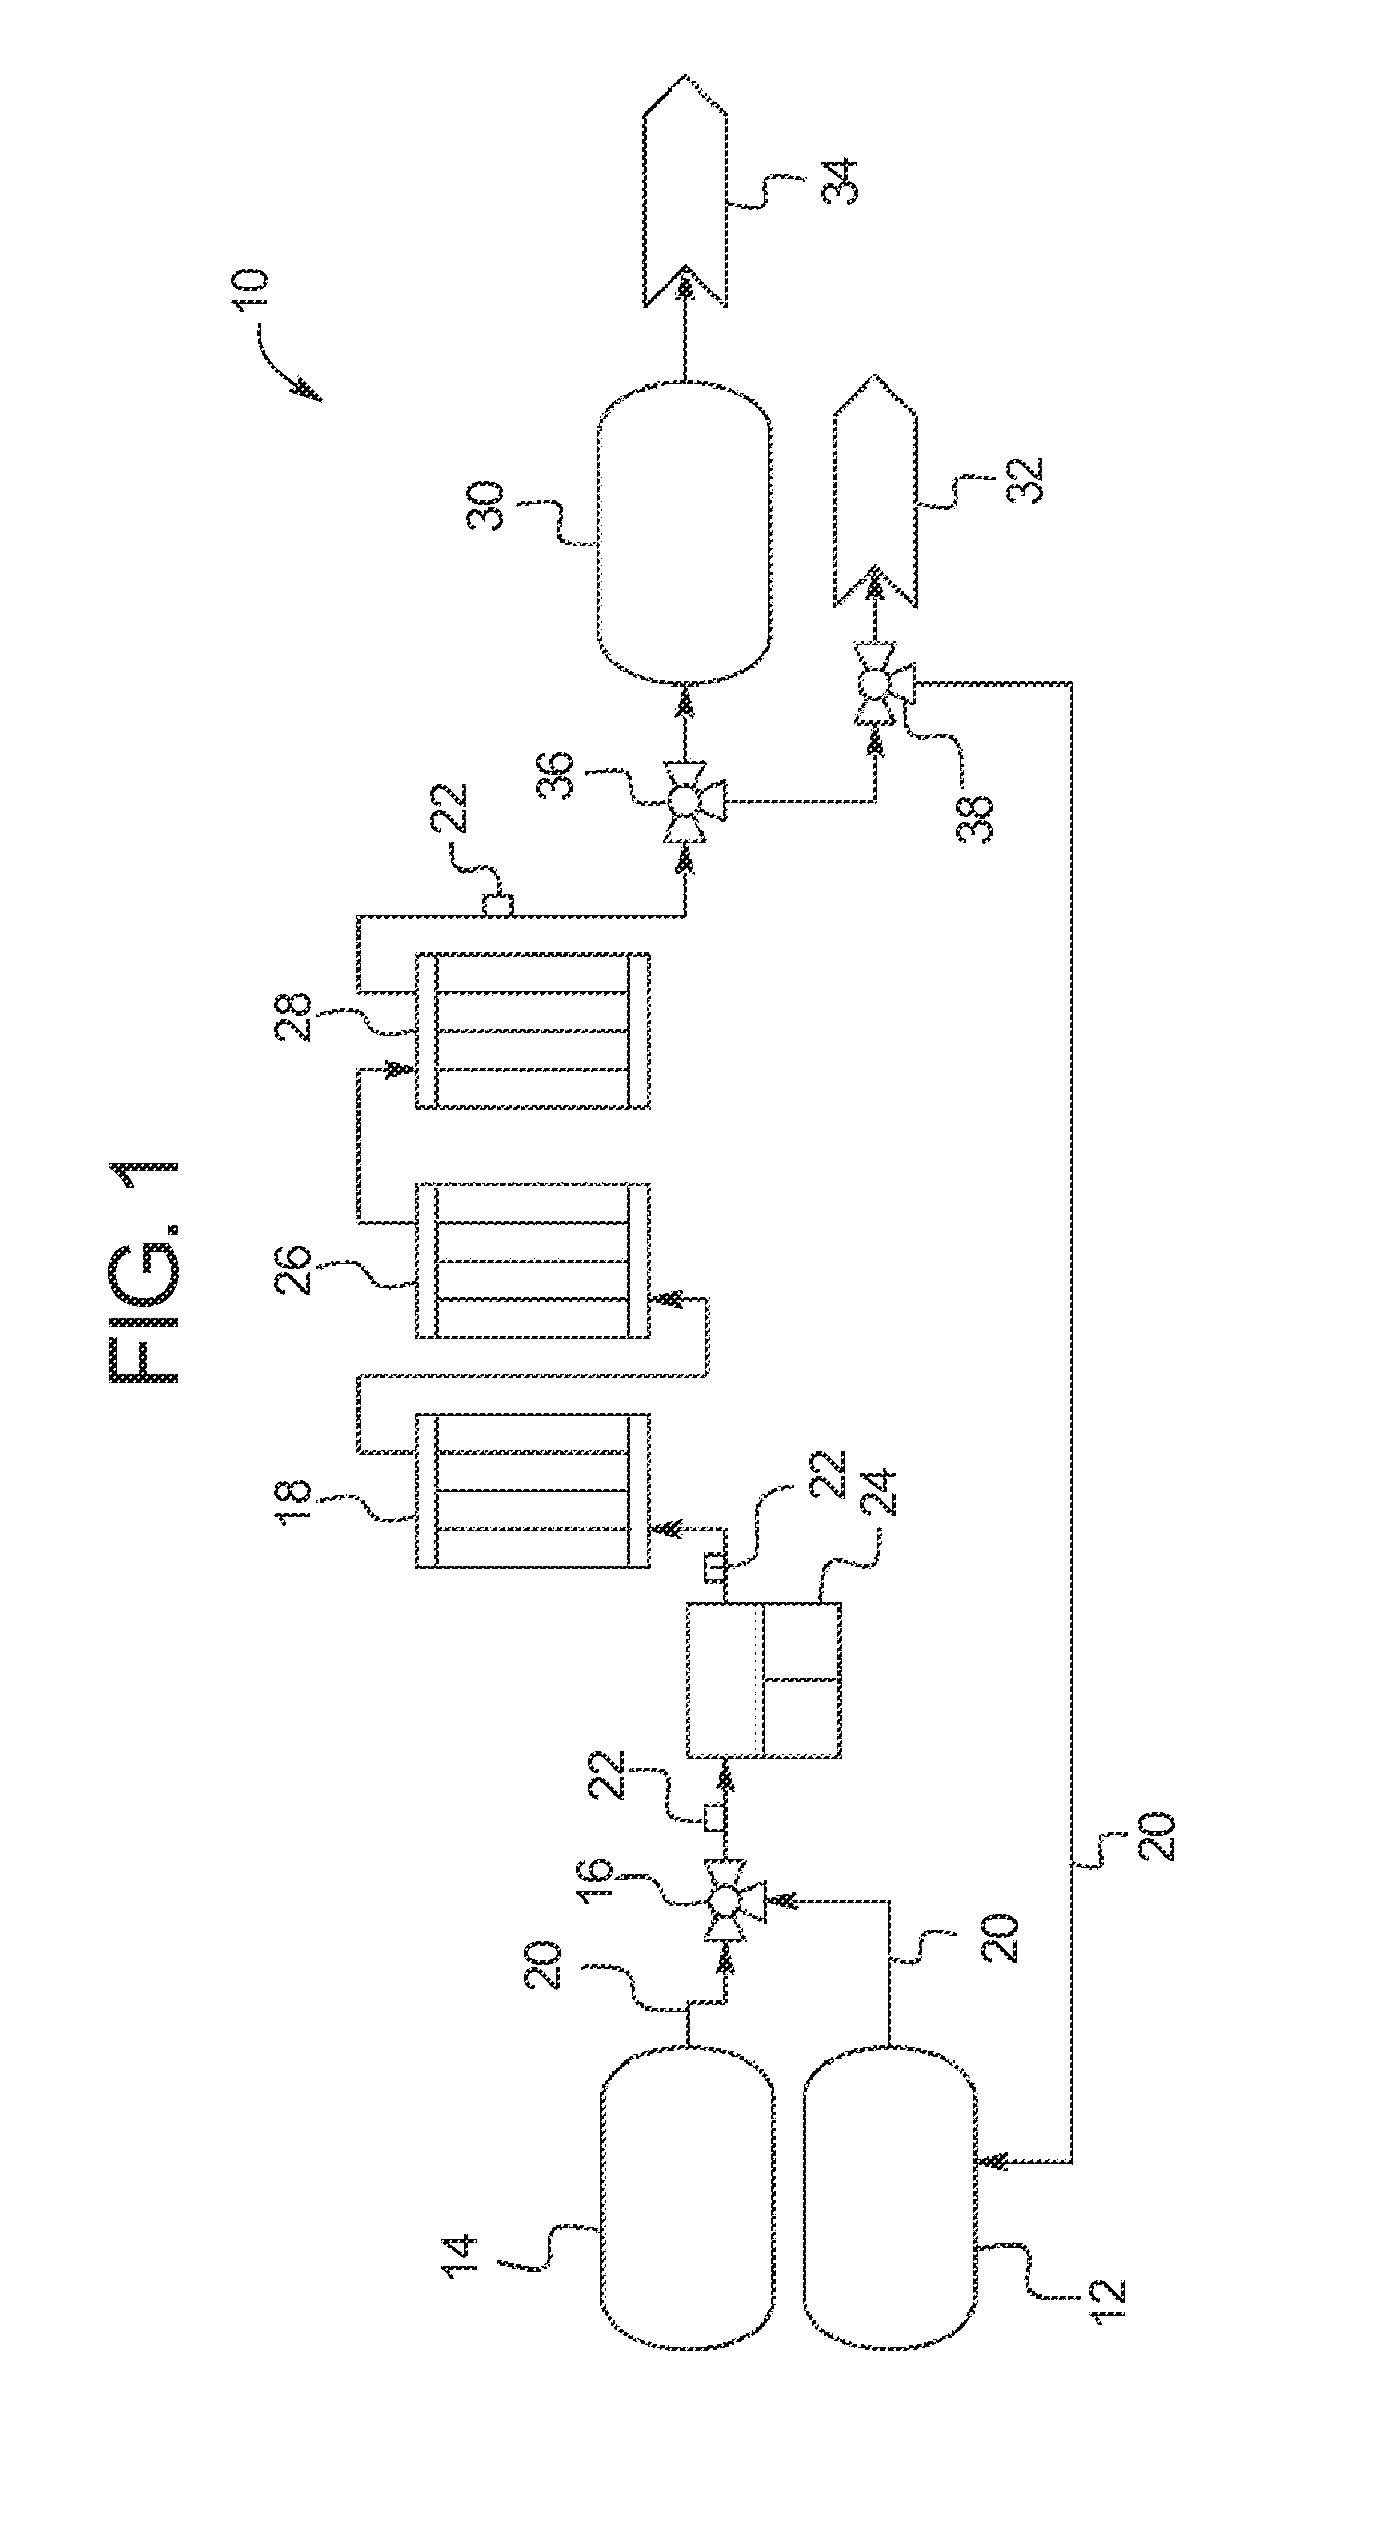 Systems and methods for detecting water/product interfaces during food processing